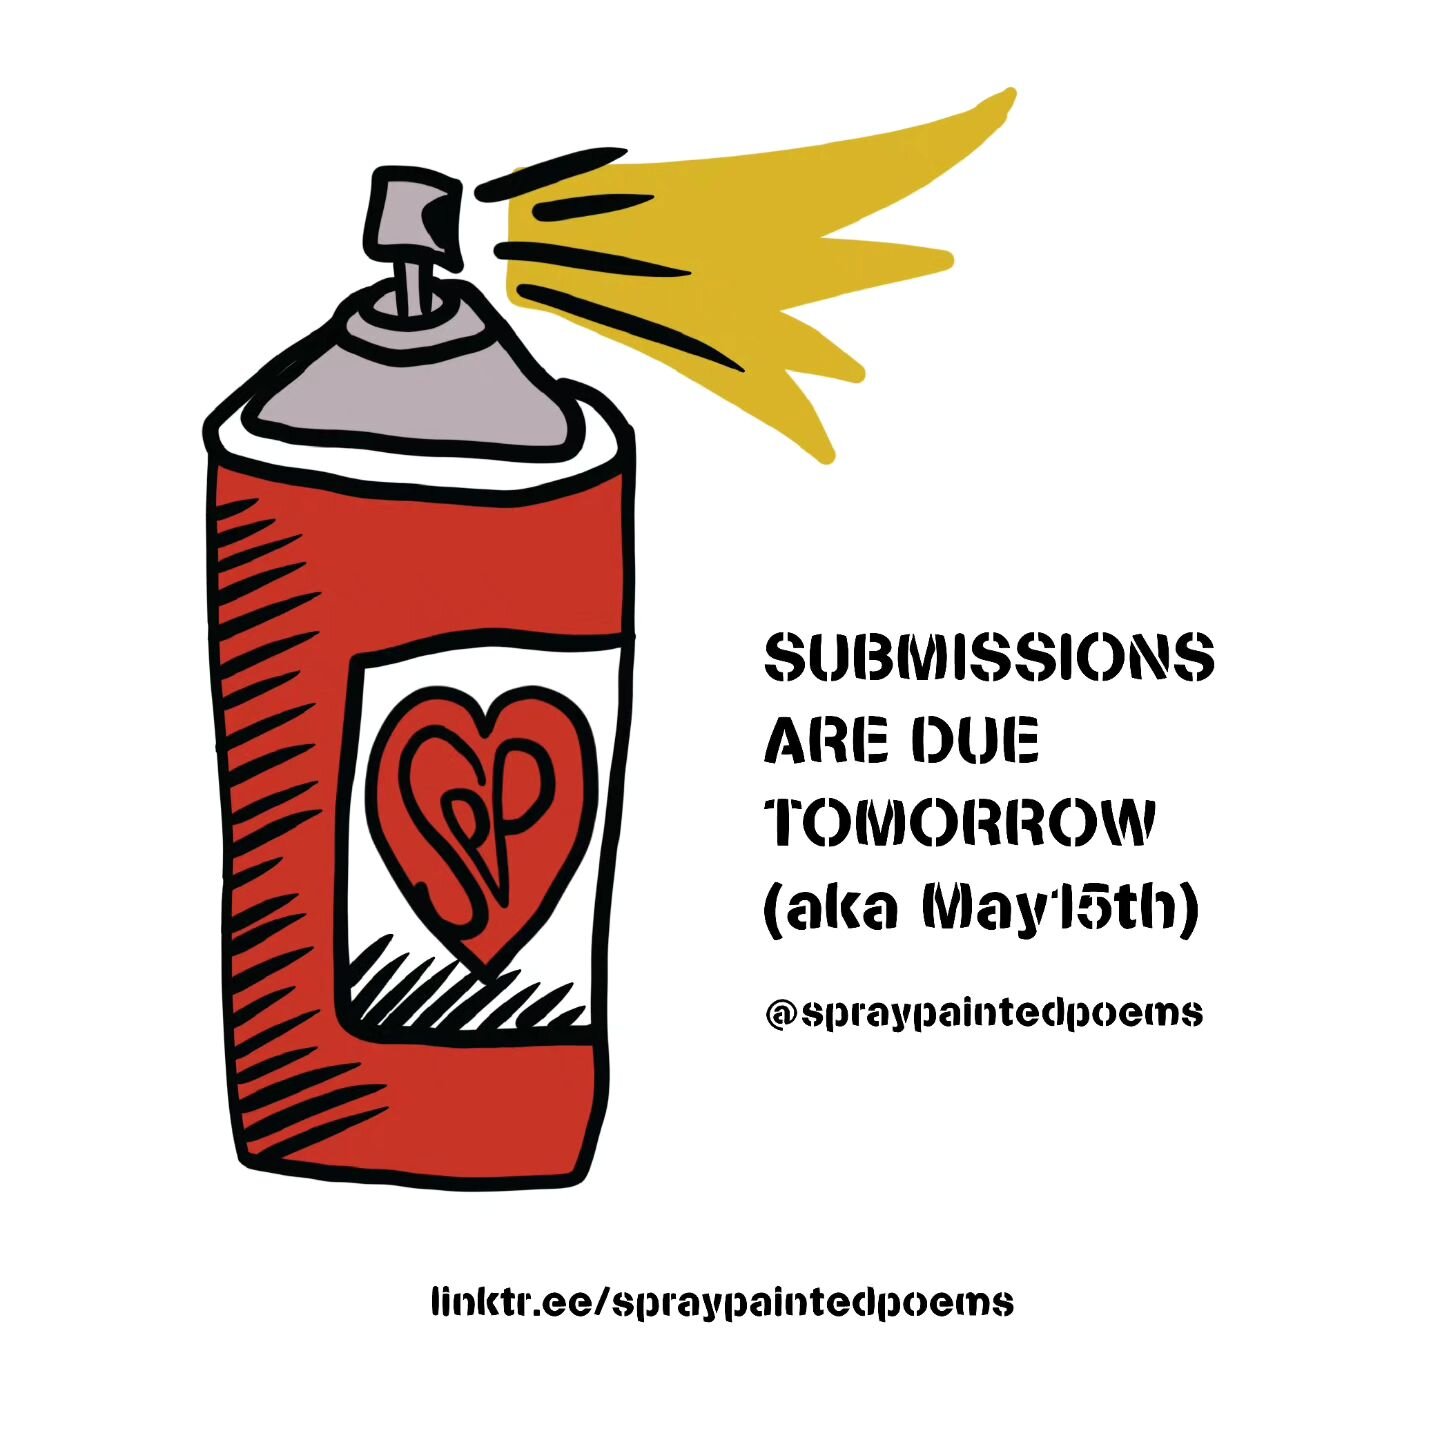 TOMORROW IS THE DAY! ✨️ if you want to see your short poems spray painted onto the sidewalks in Milwaukee, submit by the end of tomorrow (May 15th!).

🌐 link in bio to learn more &amp; submit
✍️ poems/lyrics must be 15 words or less
🎨 we'll be spra